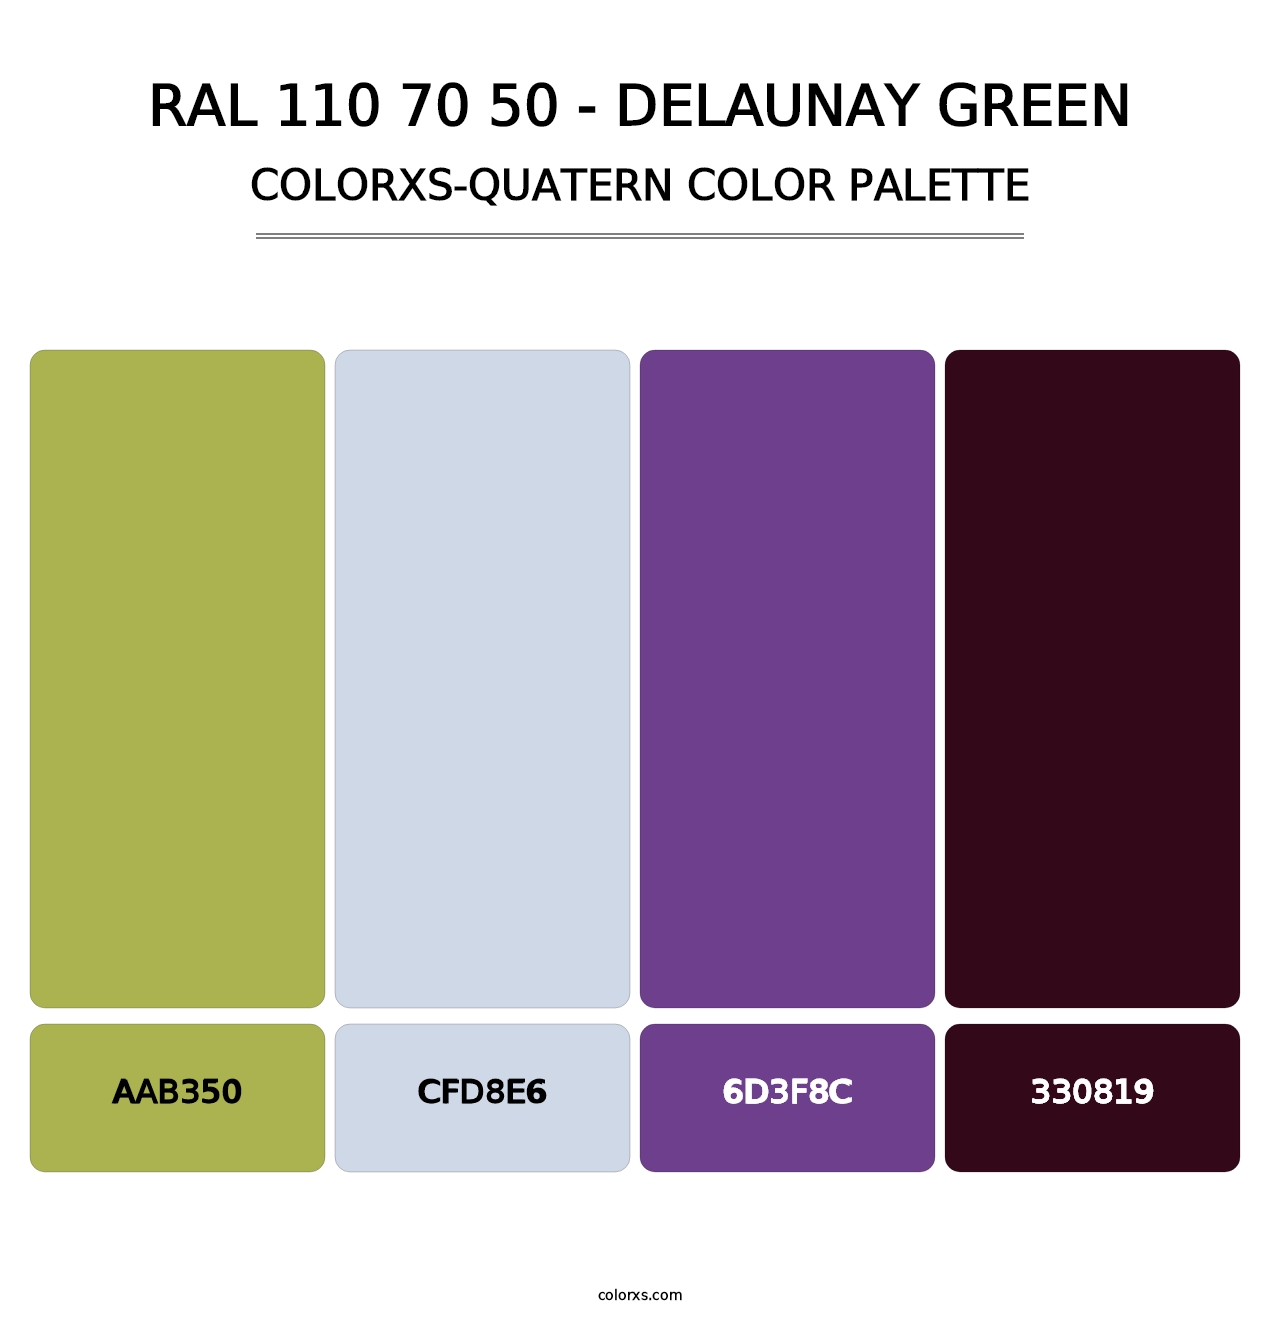 RAL 110 70 50 - Delaunay Green - Colorxs Quatern Palette